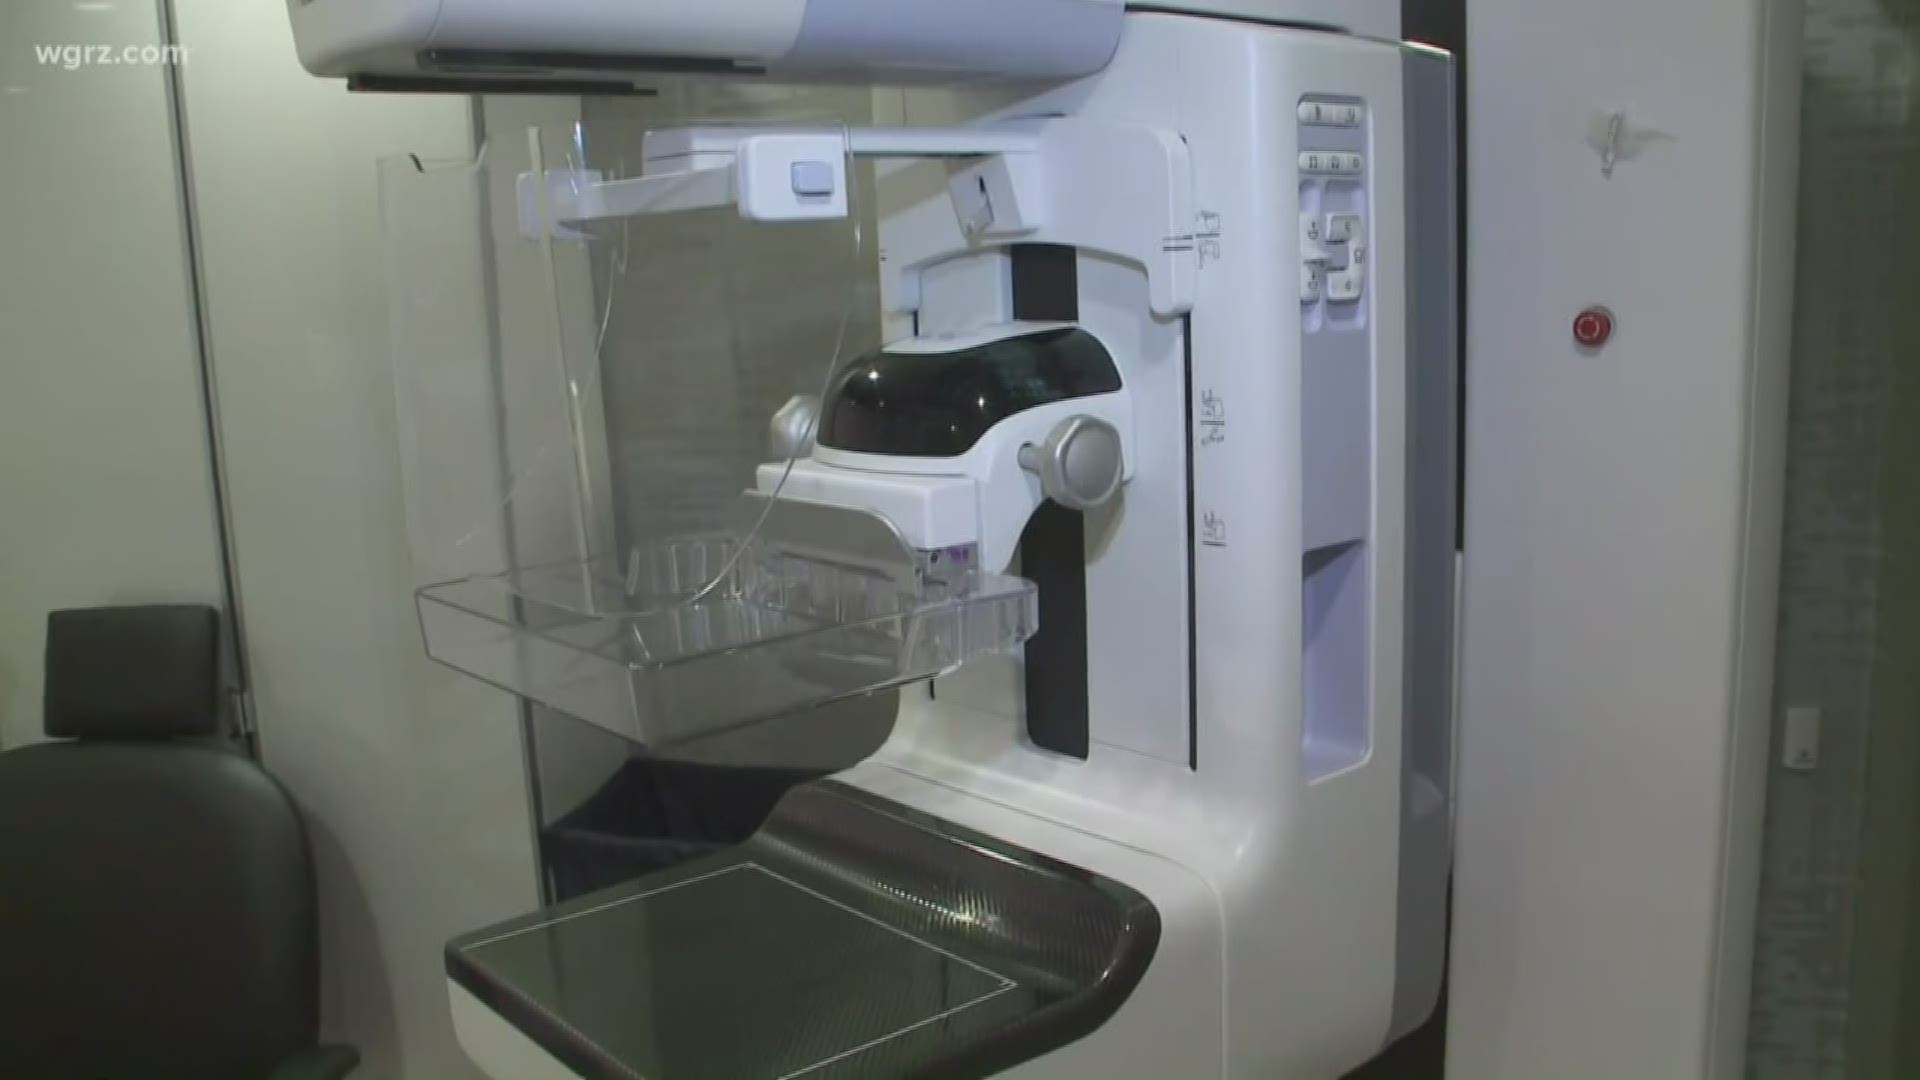 Walk inside, and the 'mobile mammo' provides women the same access to 3D mammography